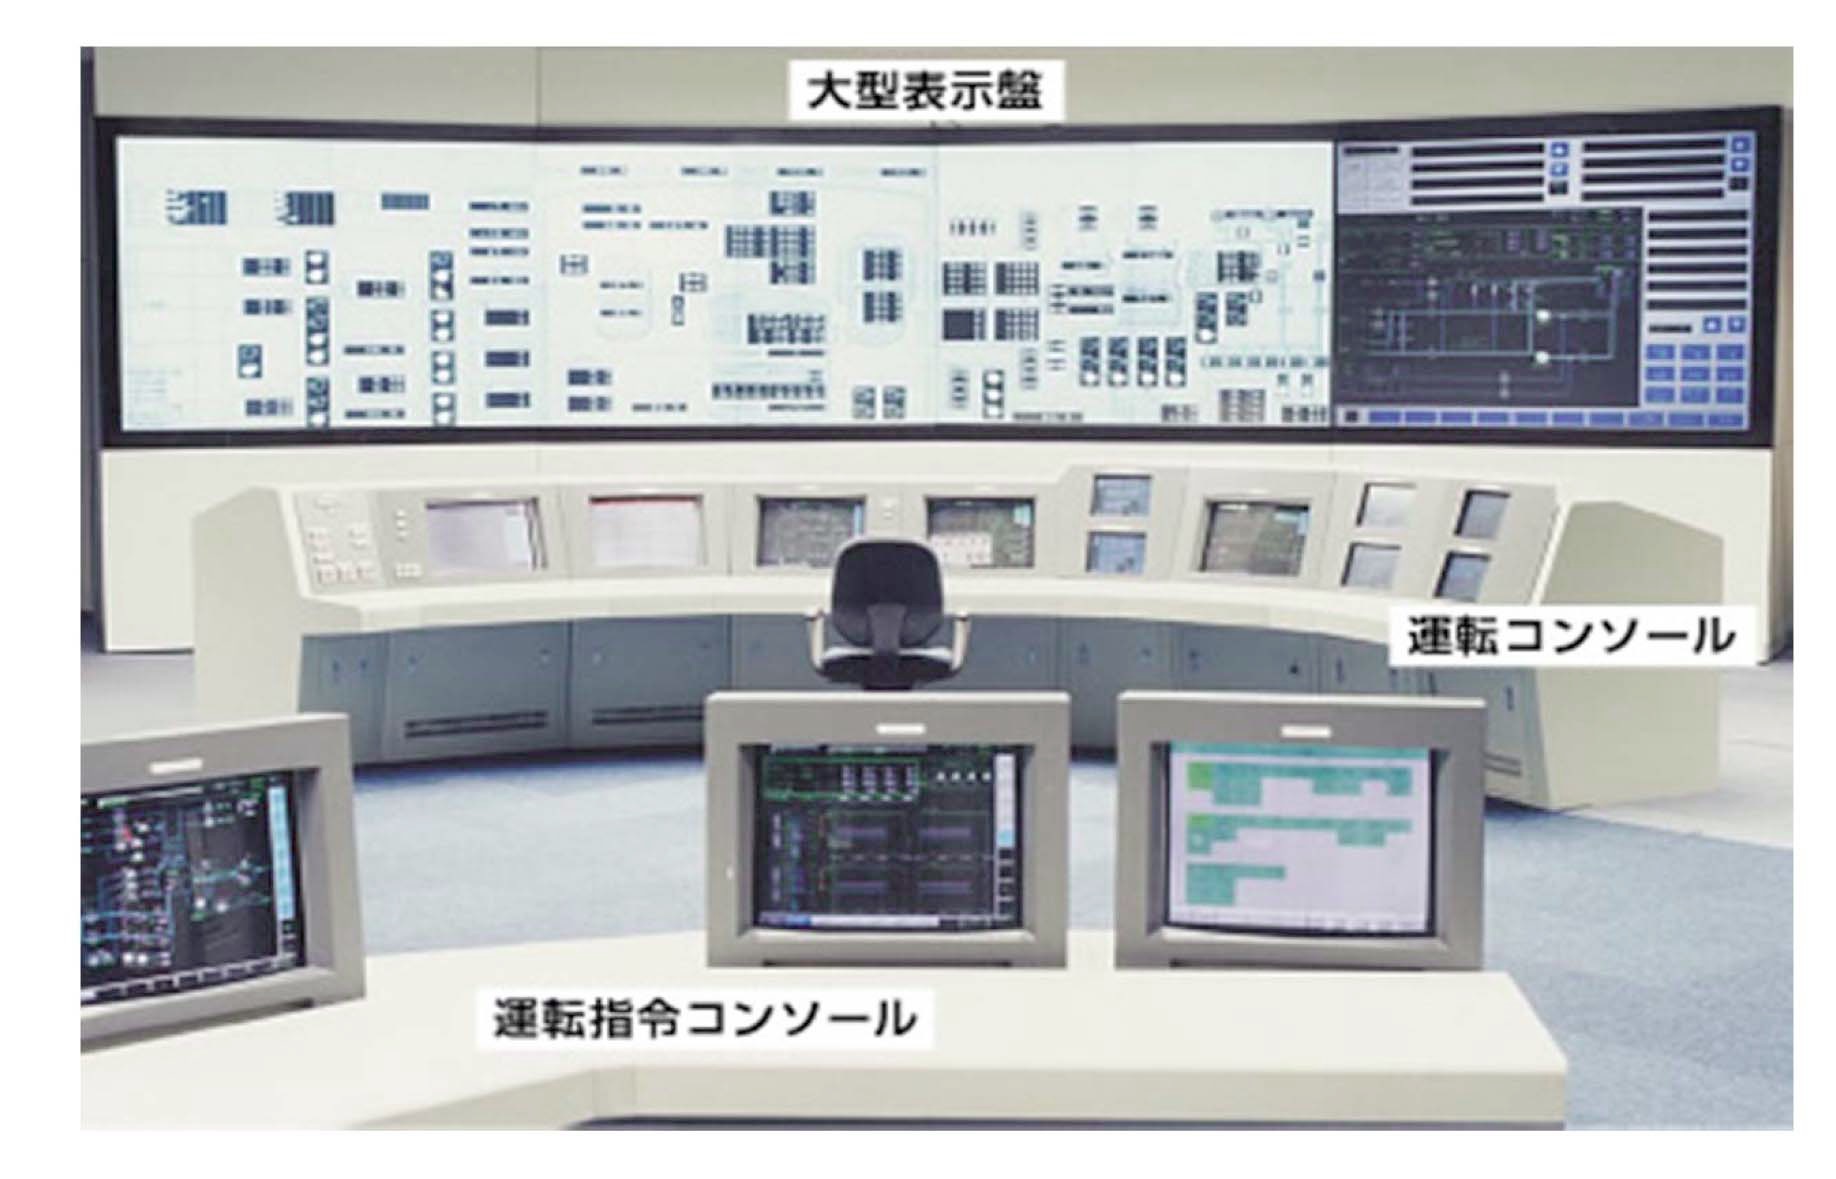 Full Digitalized Main Control Room for Japanese PWR